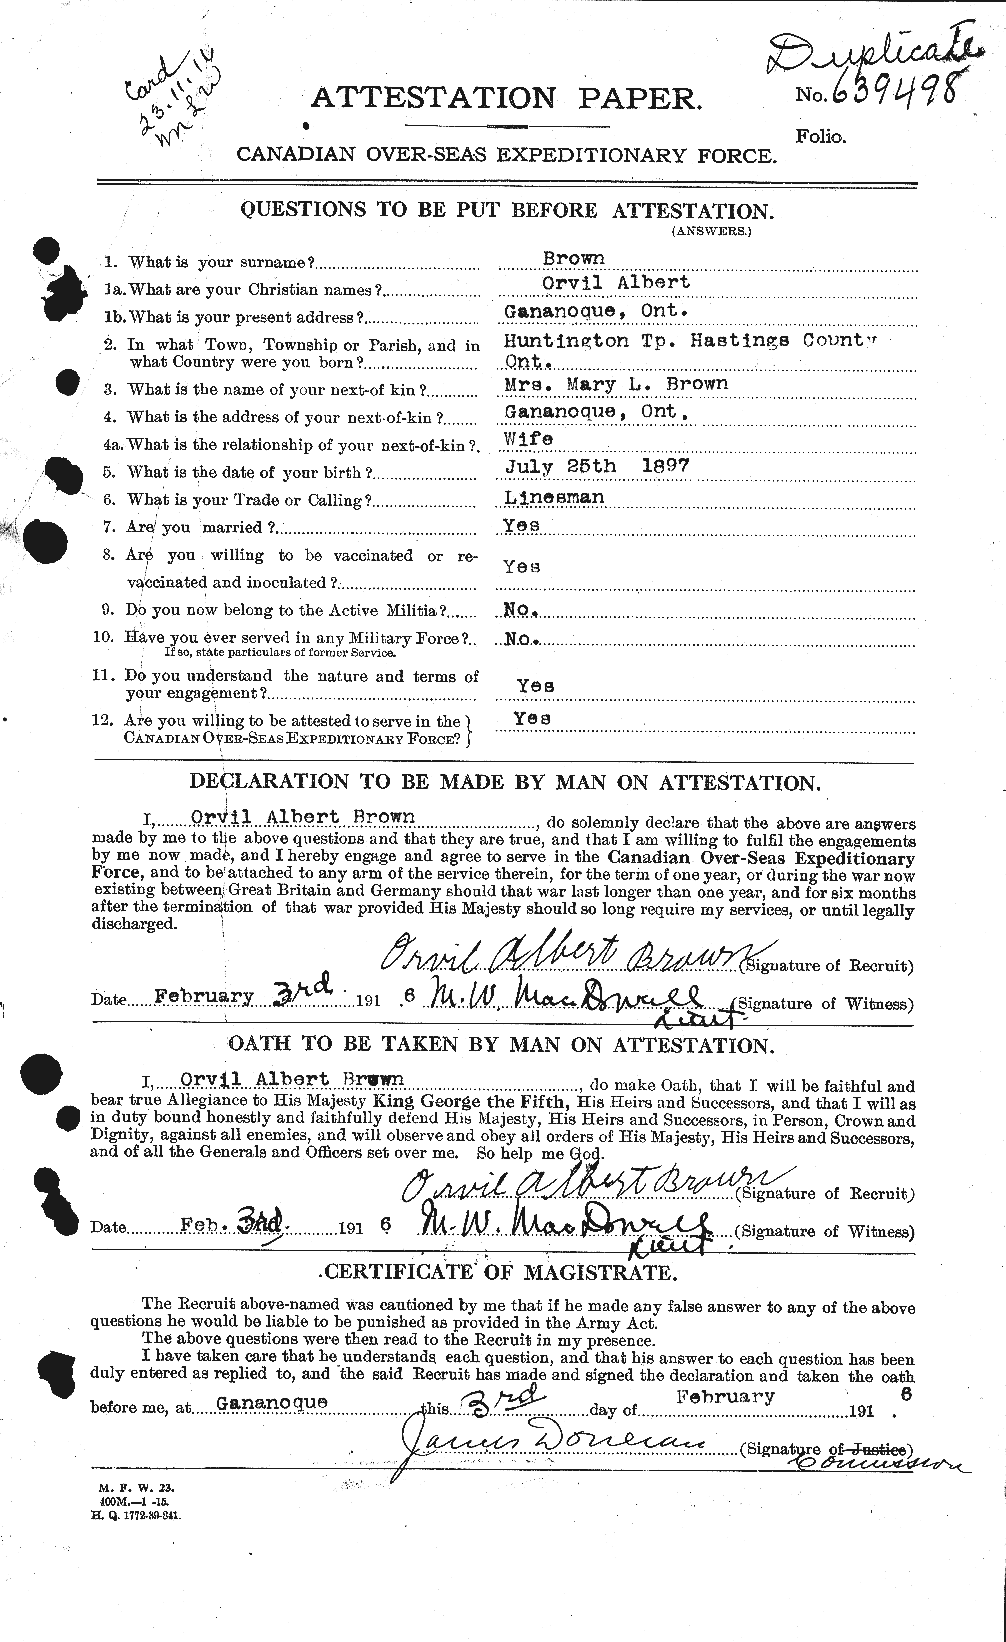 Personnel Records of the First World War - CEF 267132a